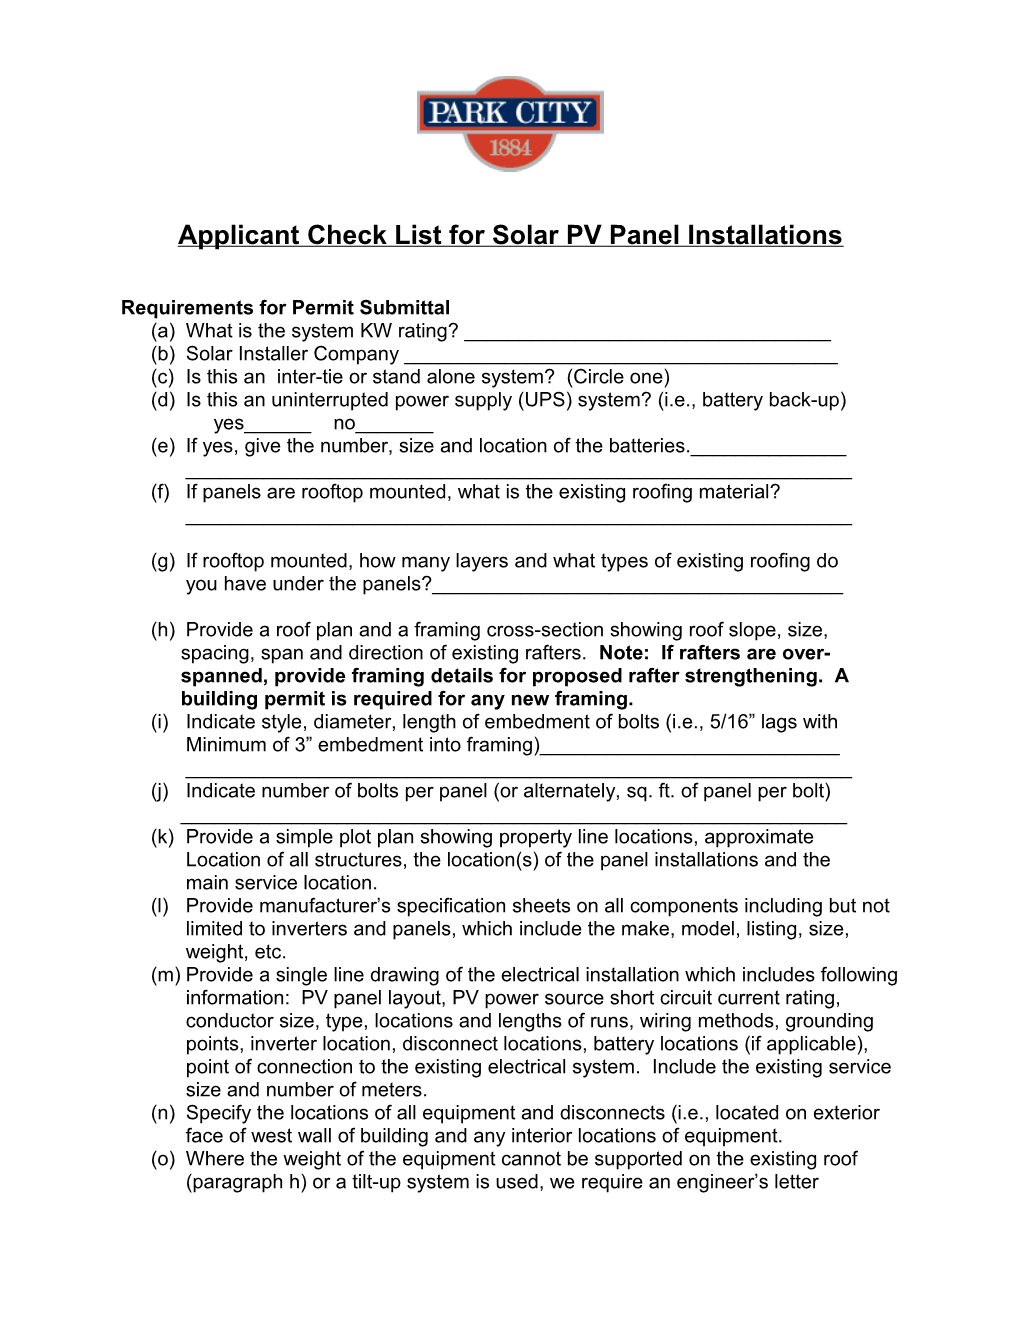 Applicant Check List for Solar PV Panel Installations